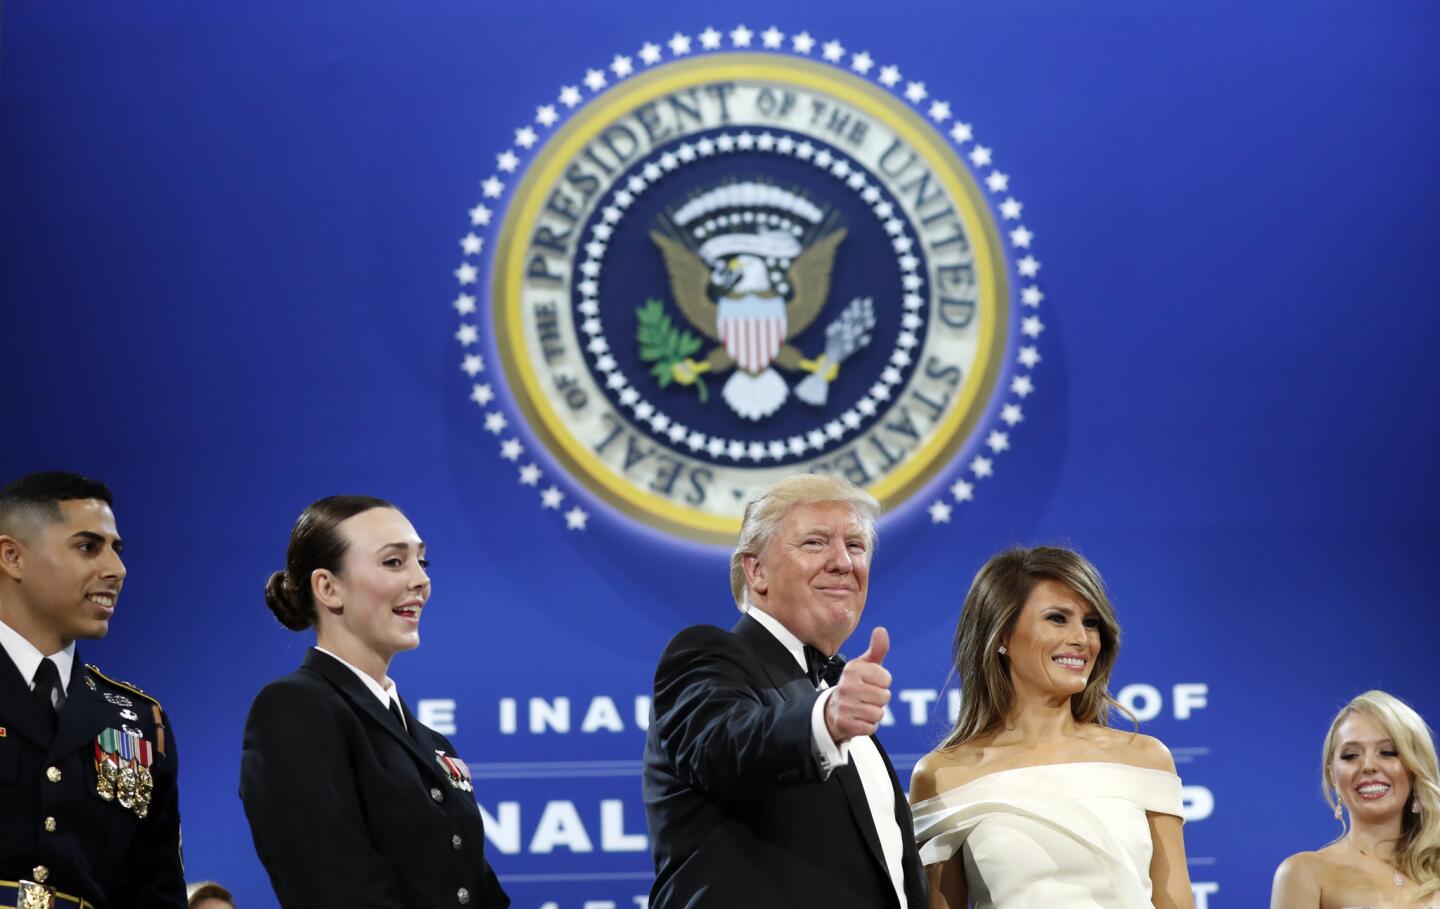 President Donald Trump gives a thumbs-up alongside first lady Melania Trump at the Salute To Our Armed Services Inaugural Ball in Washington, D.C., on Friday, Jan. 20, 2017. At left is Army Staff Sgt. Joseph A. Medina and second from left is Navy Petty Officer 2nd Class Catherine Cartmell.